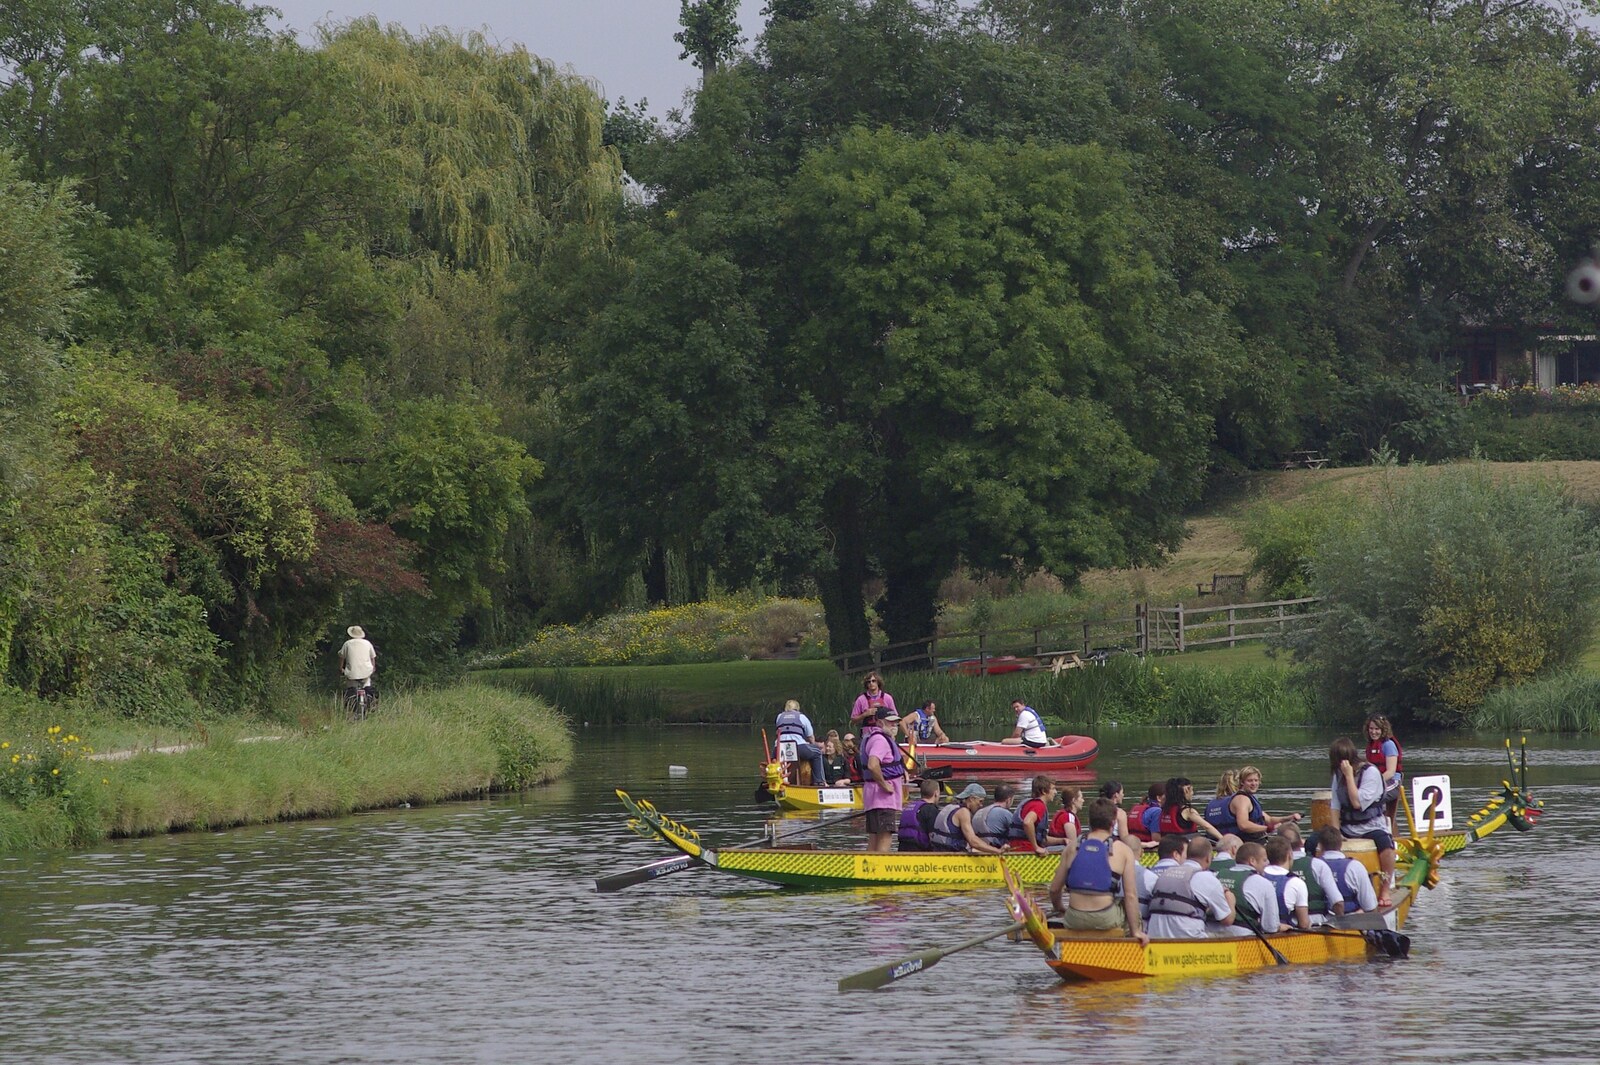 Qualcomm's Dragon-Boat Racing, Fen Ditton, Cambridge - 8th September 2007: A bucolic scene after the finish line